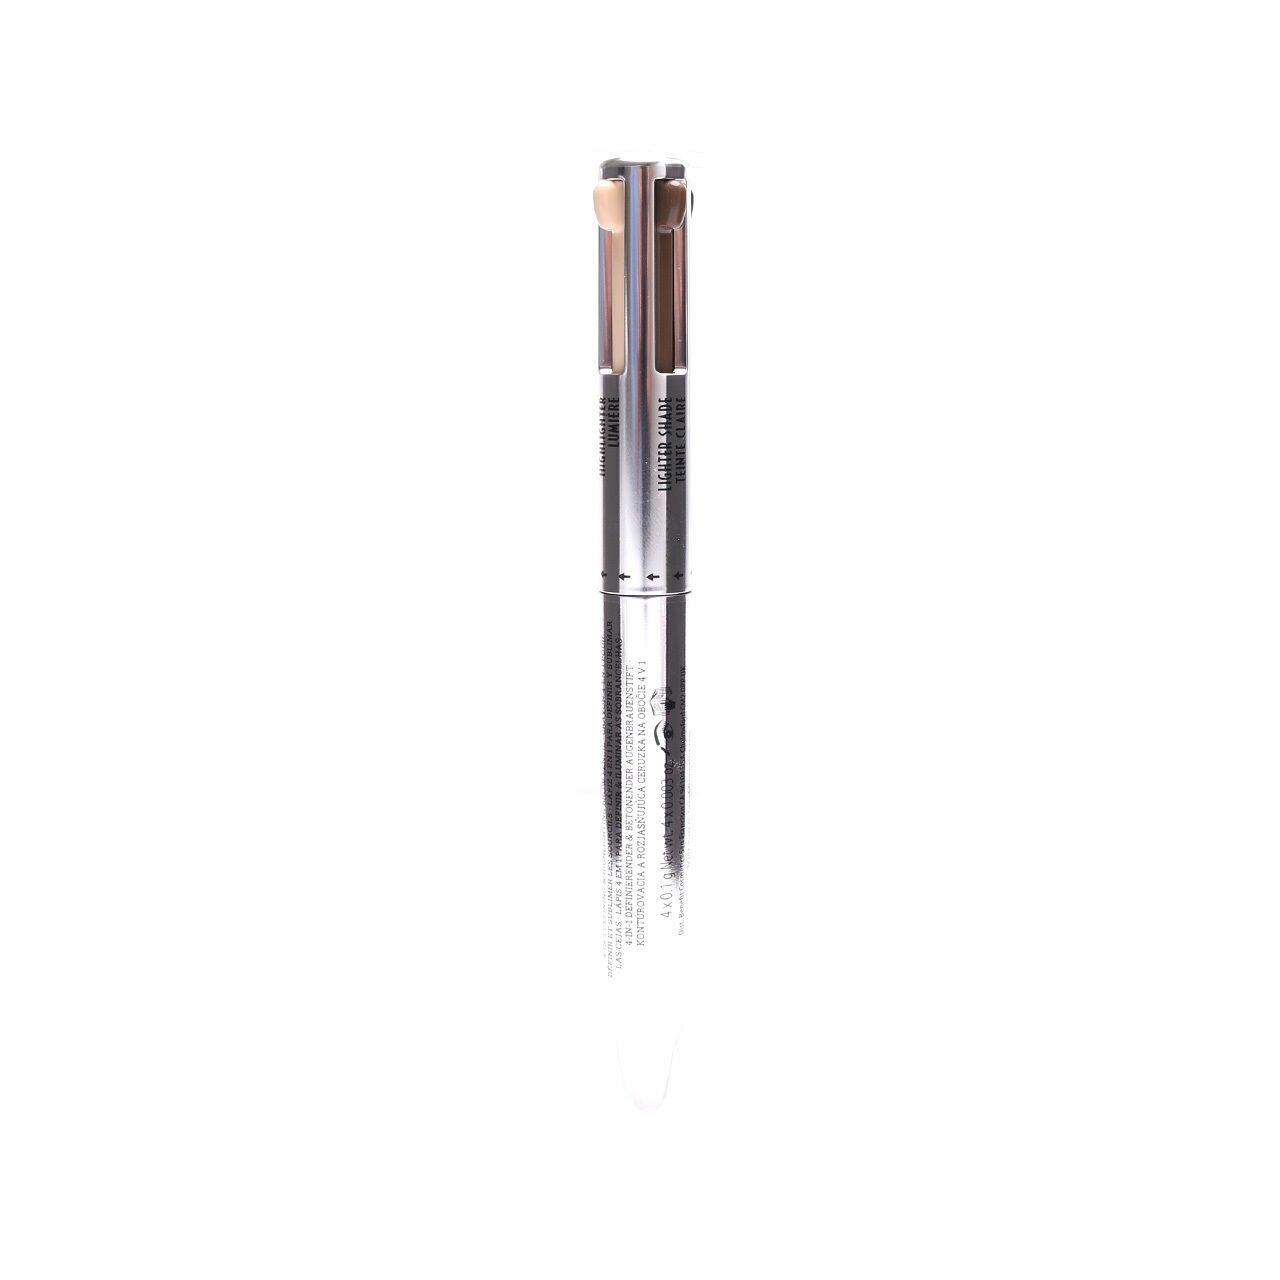 Benefit Brown, Black, & Light Brow Contour Pro 4-in-1 Defining & Highlighting Brow Pencil Eyes